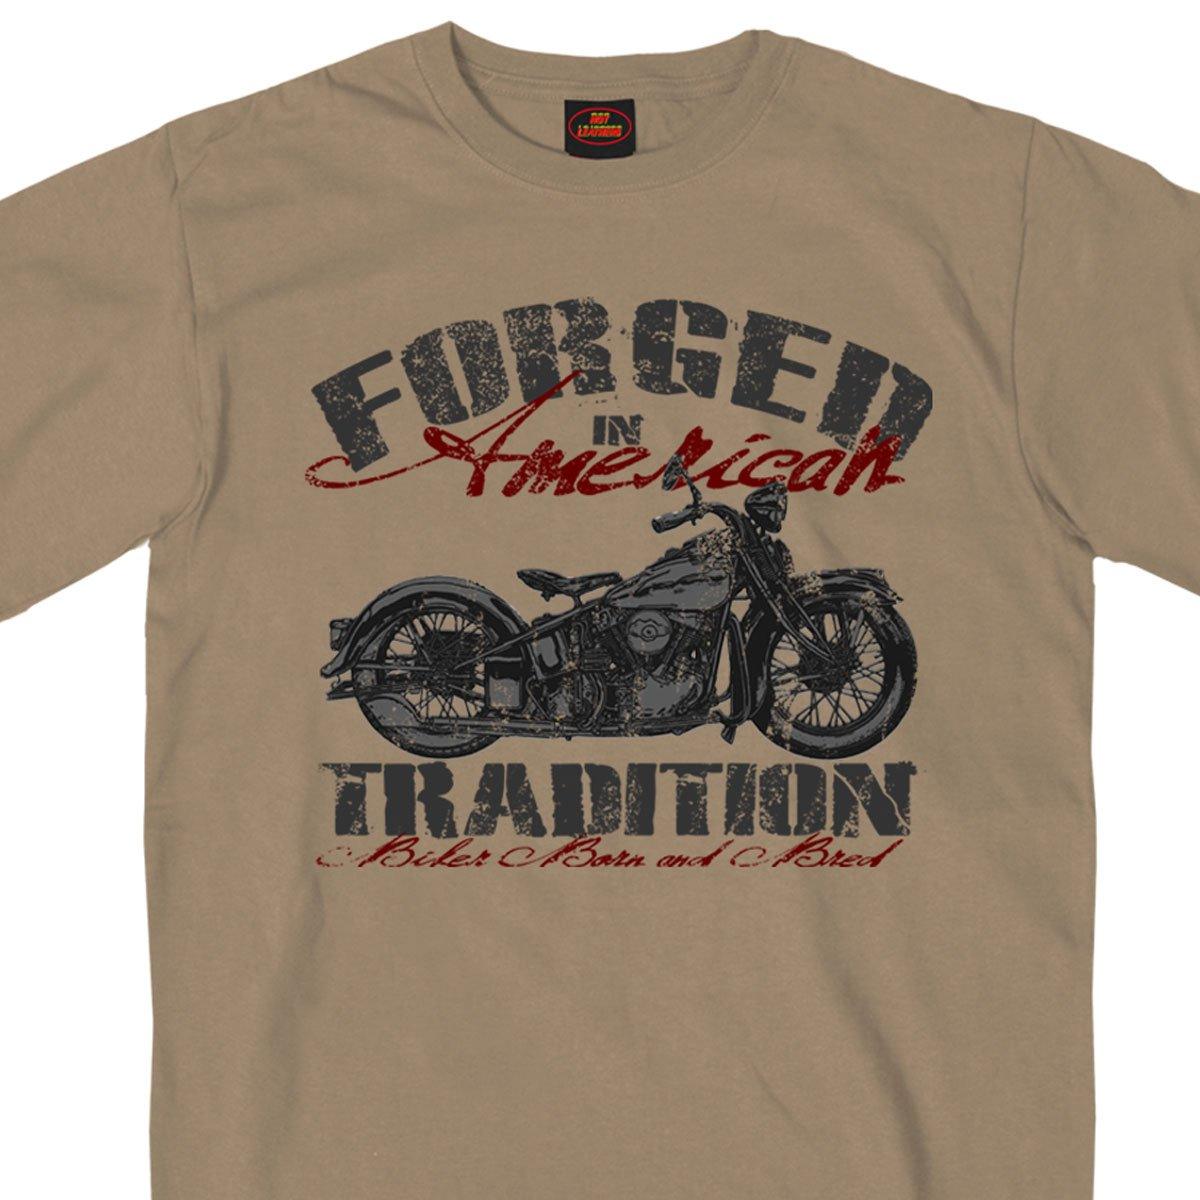 Hot Leathers Men's Forged In American Tradition T-Shirt, Khaki - American Legend Rider